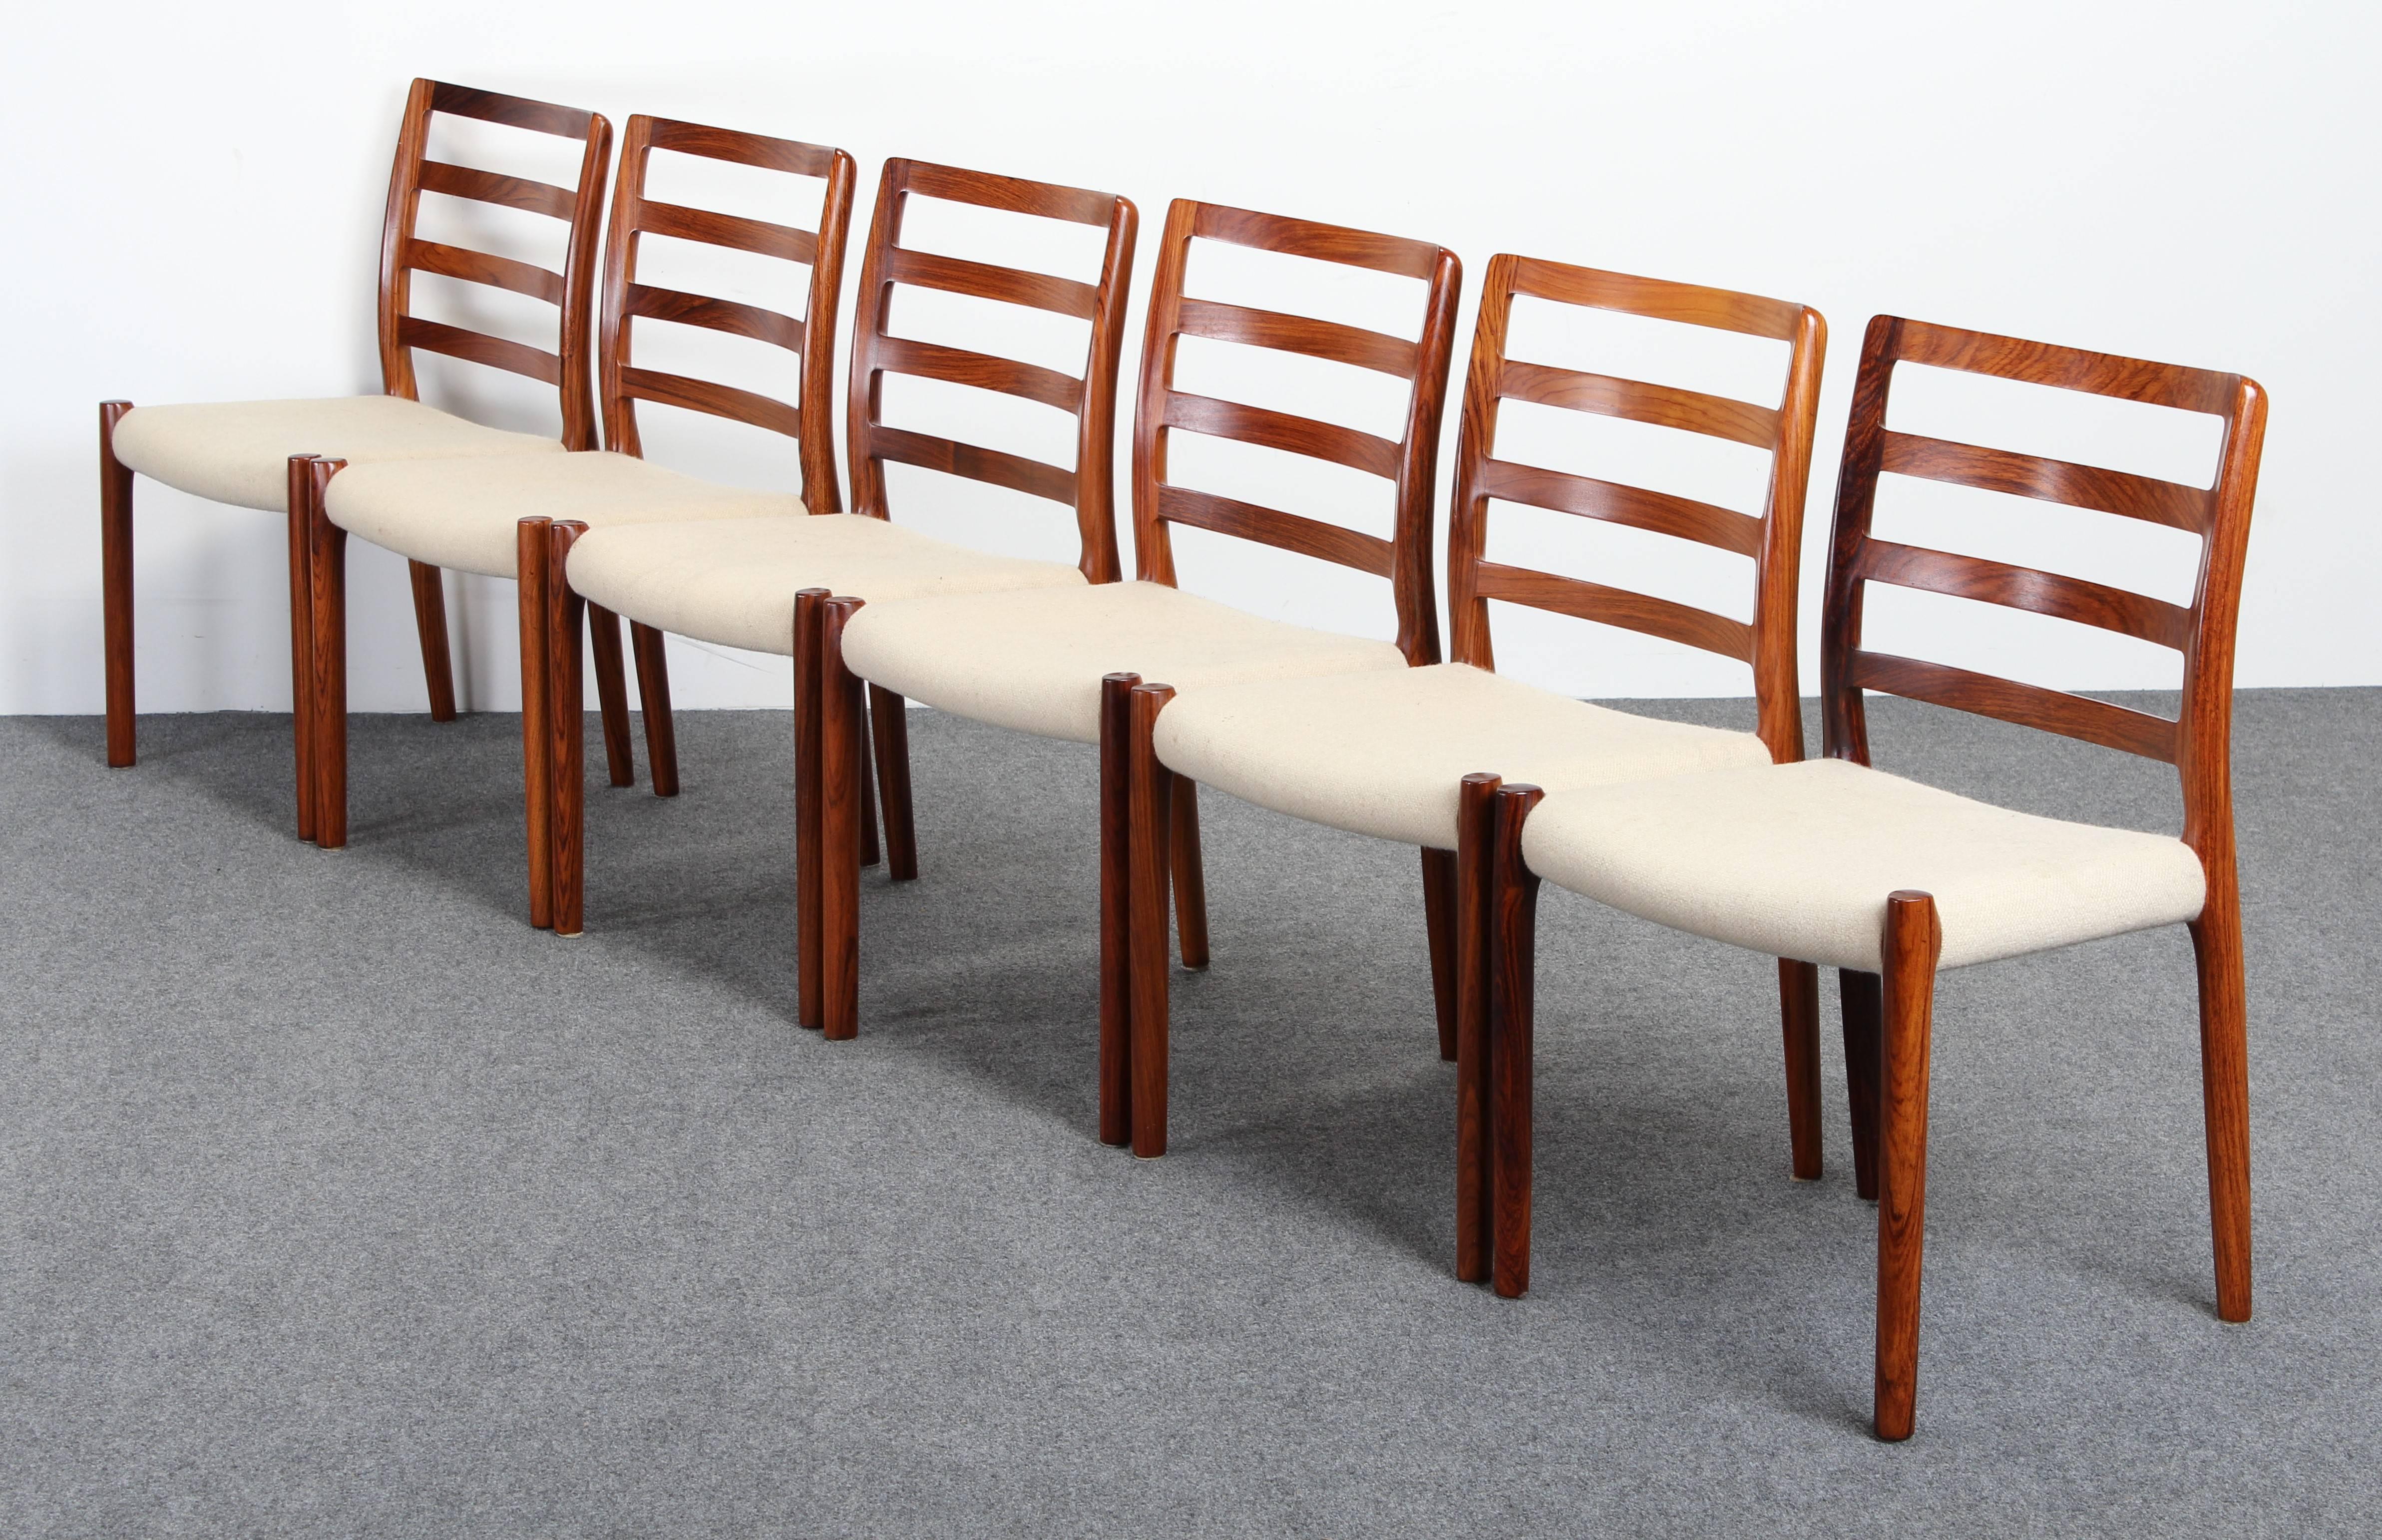 A well crafted set of six Danish rosewood Niels O. Moller chairs, No 85. These are the most sturdy and strongest built Danish chairs available. Stamped J. L. Moller Models Made in Denmark on bottom of chairs. Re-upholstery required. Seat height 18